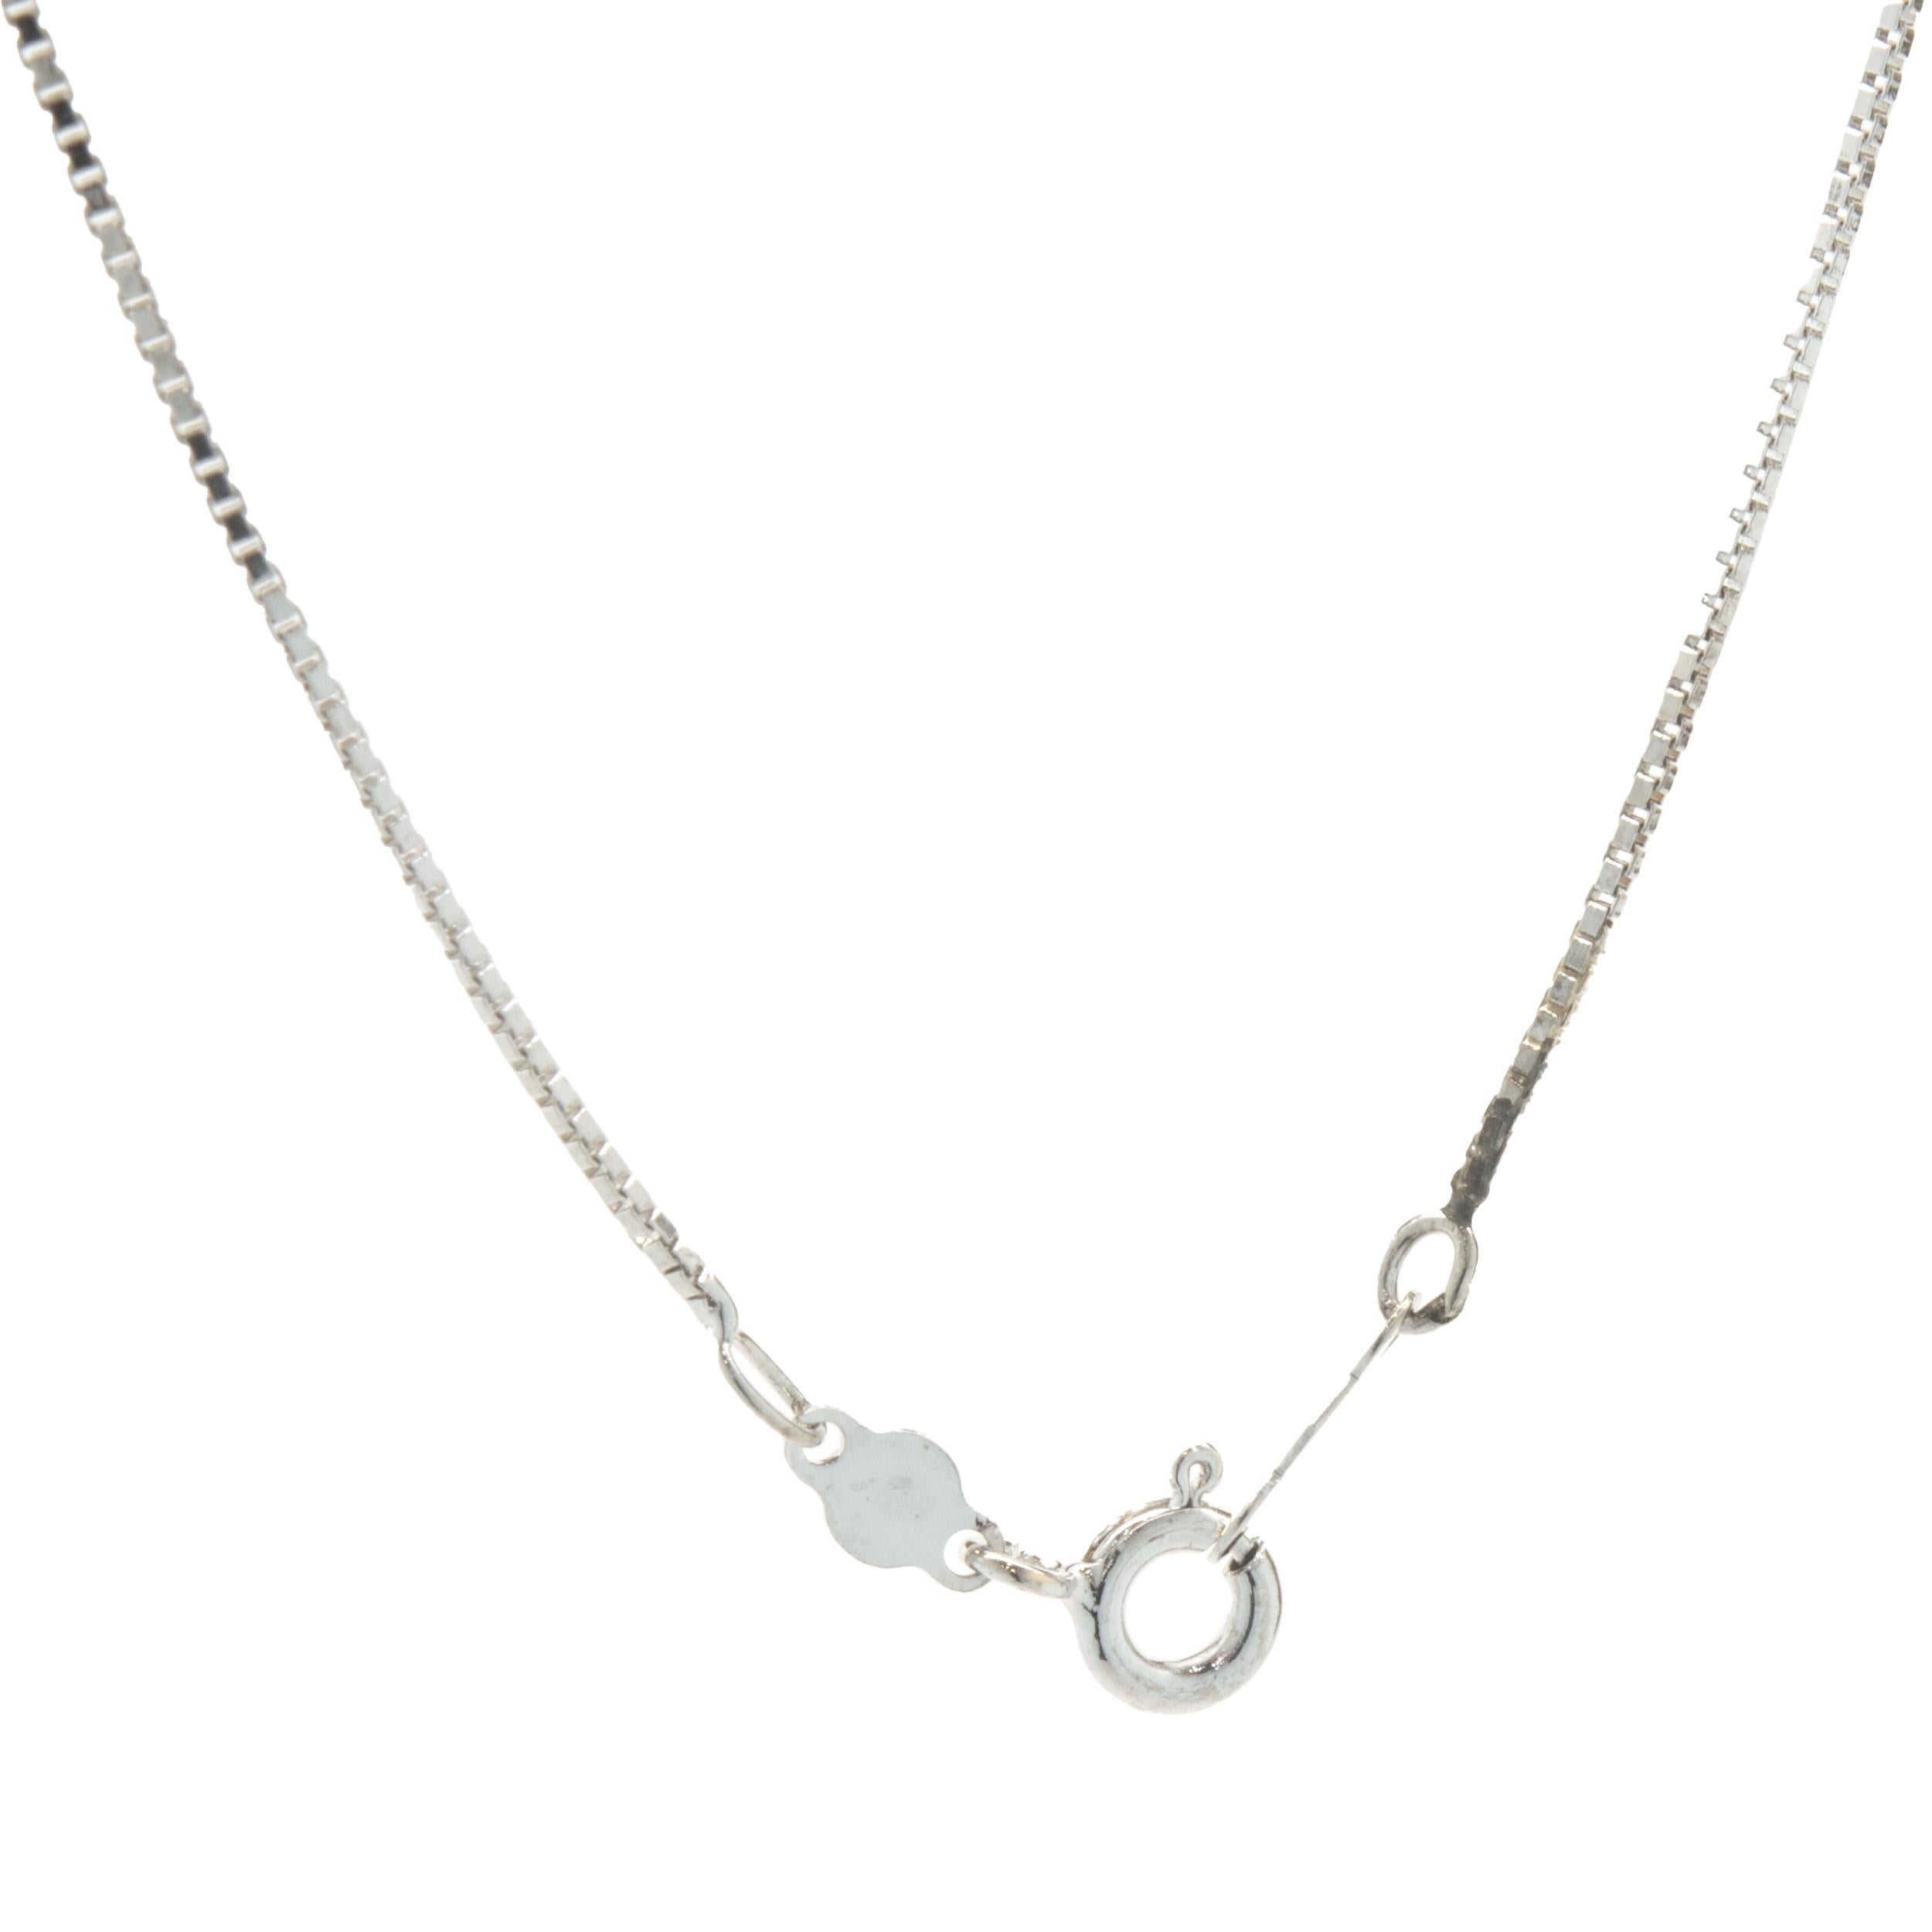 Designer: custom design
Material: 14K white gold
Diamond: 1 round brilliant cut = 0.94cttw
Color: H
Clarity: I1
Dimensions: necklace measures 16-inches in length 
Weight: 3.05 grams